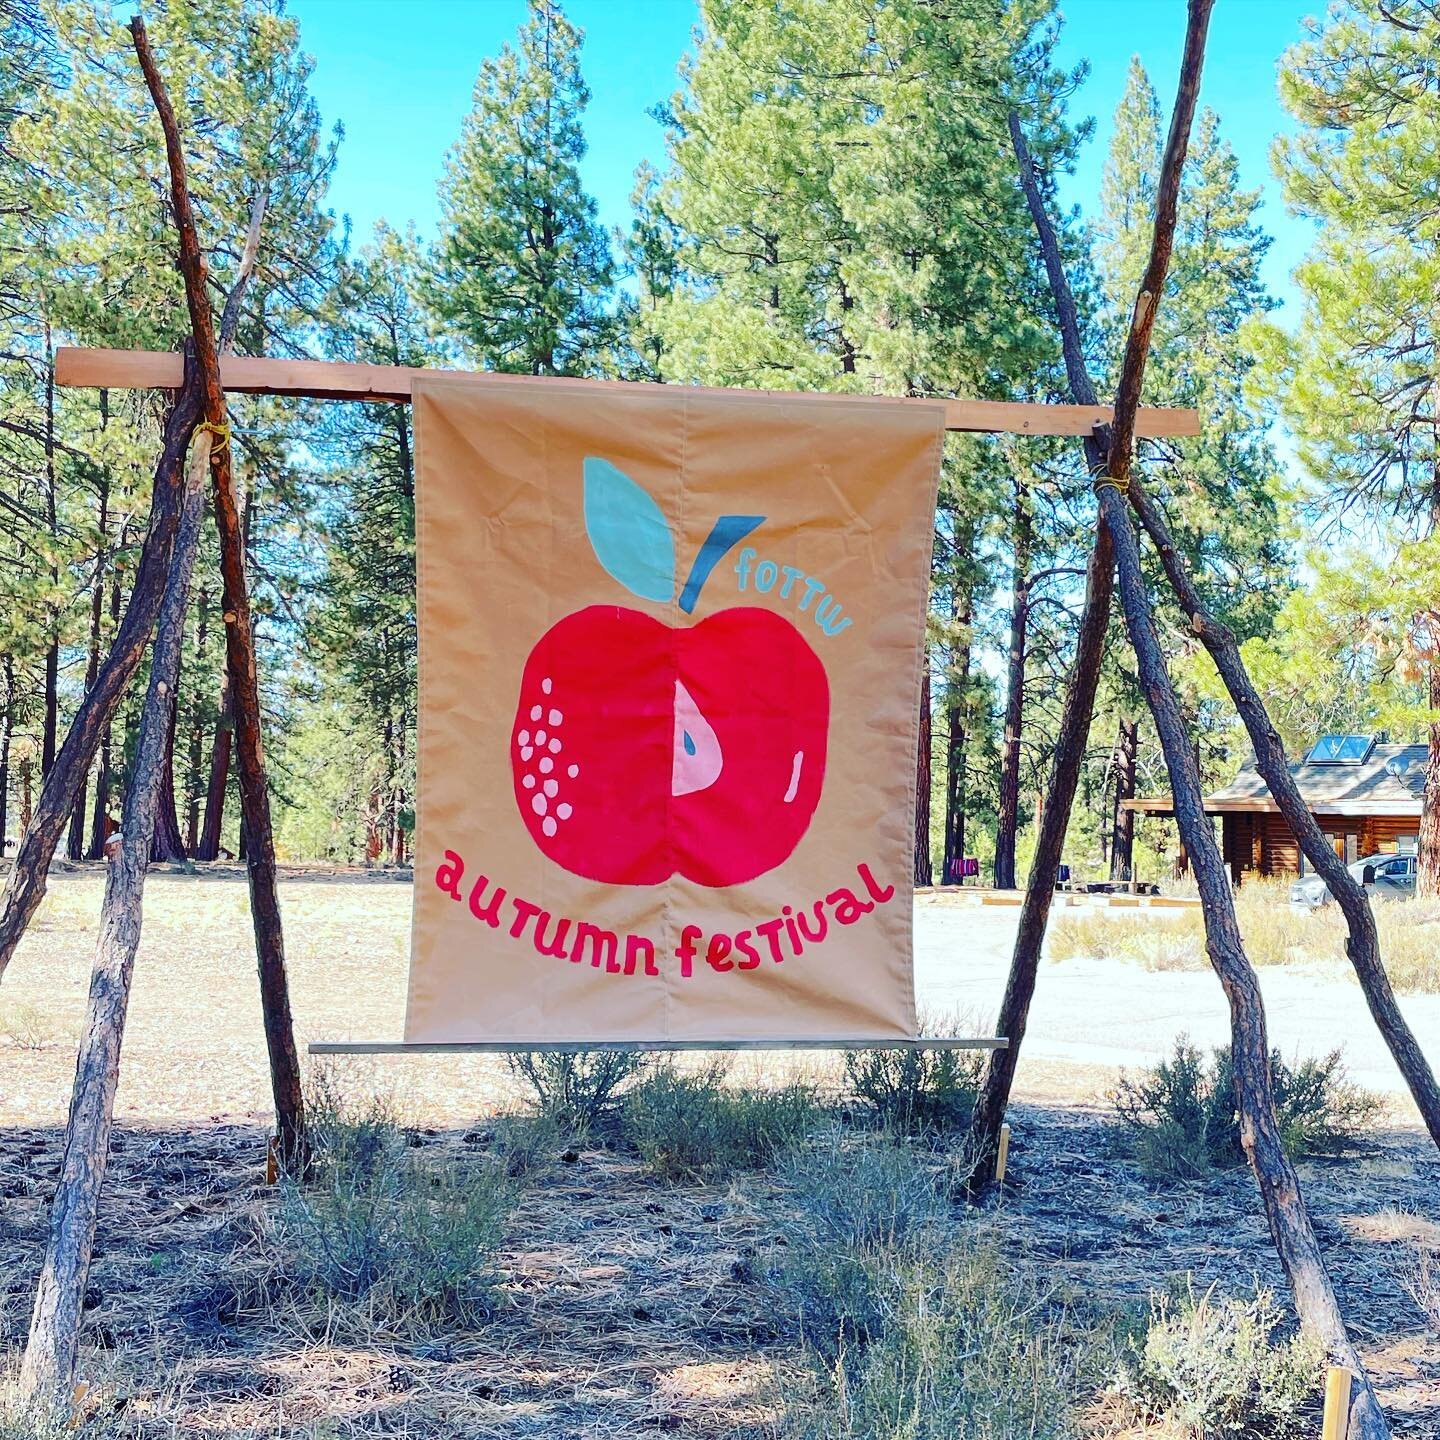 Getting ready and excited for the Fall Festival this Sunday! See you there! 11am-3pm
12649 Union Mils Rd. Truckee